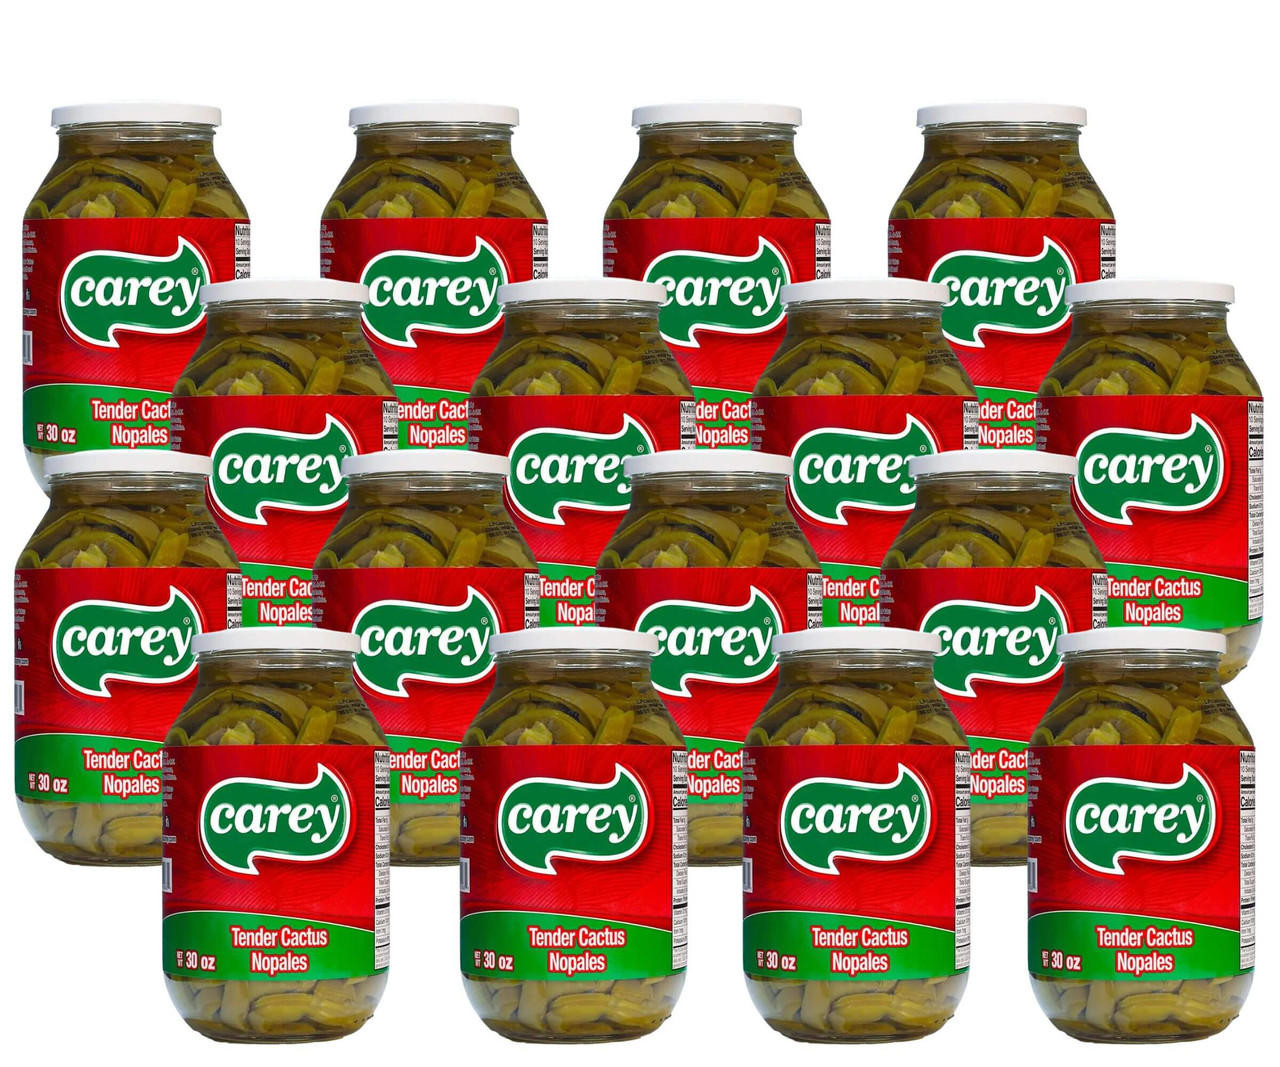  Carey Tender Cactus Nopales 33 oz (12-Case) - Sliced Tender Cactus for Authentic Latin American Dishes 